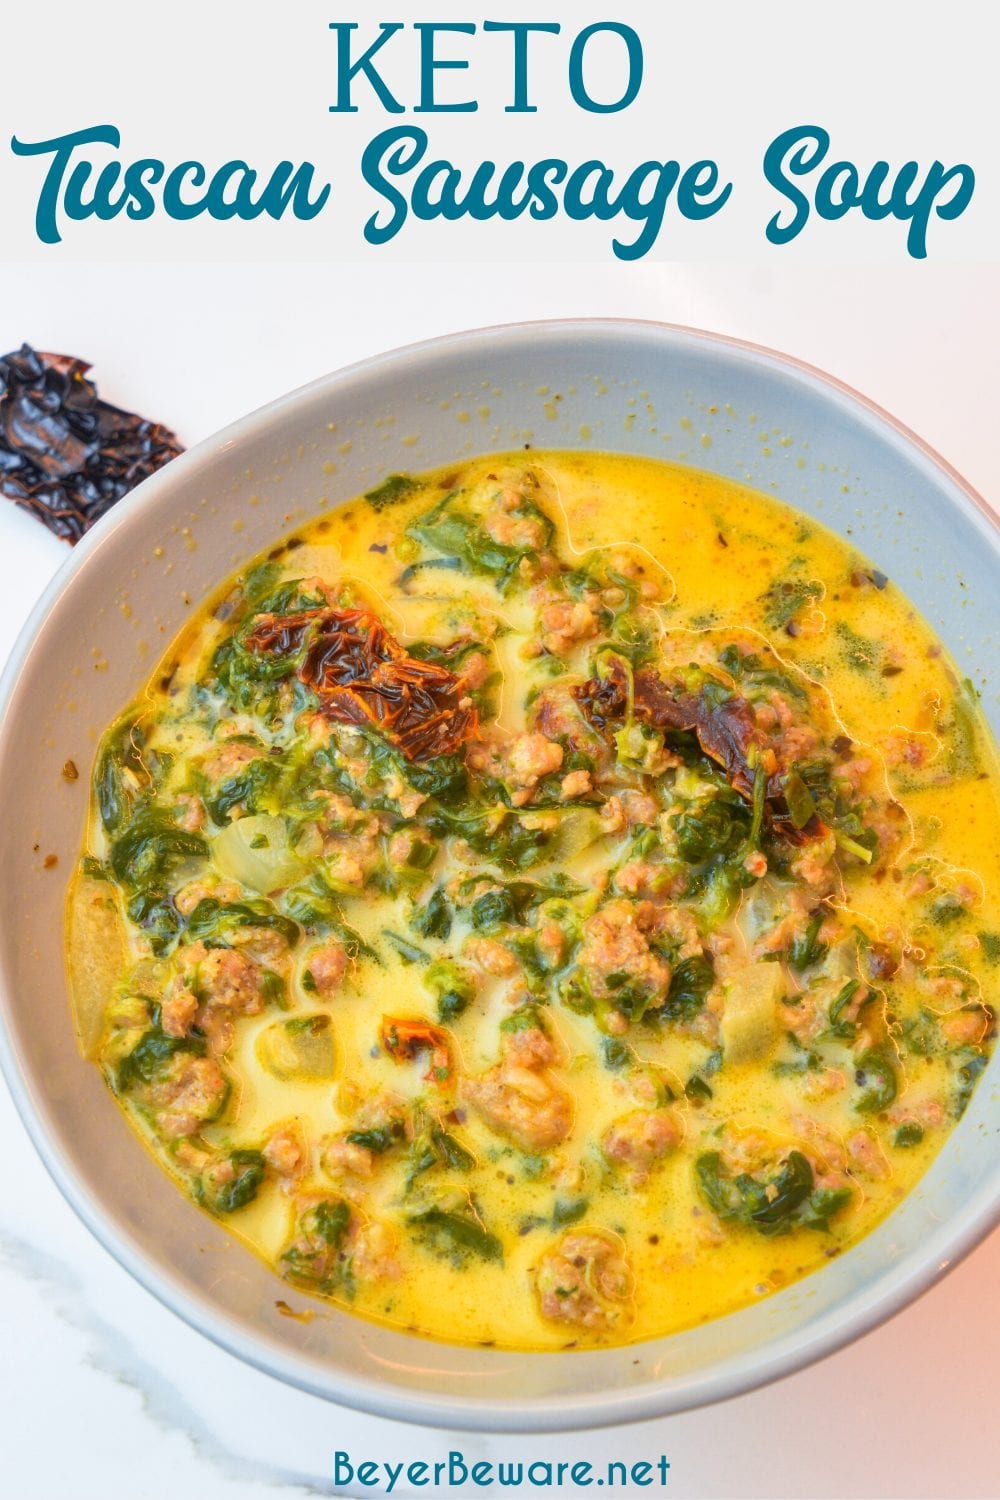 Keto Tuscan sausage soup is a creamy spicy sausage soup with plenty of spinach, sun-dried tomatoes, and spice for an easy and satisfying low-carb soup.